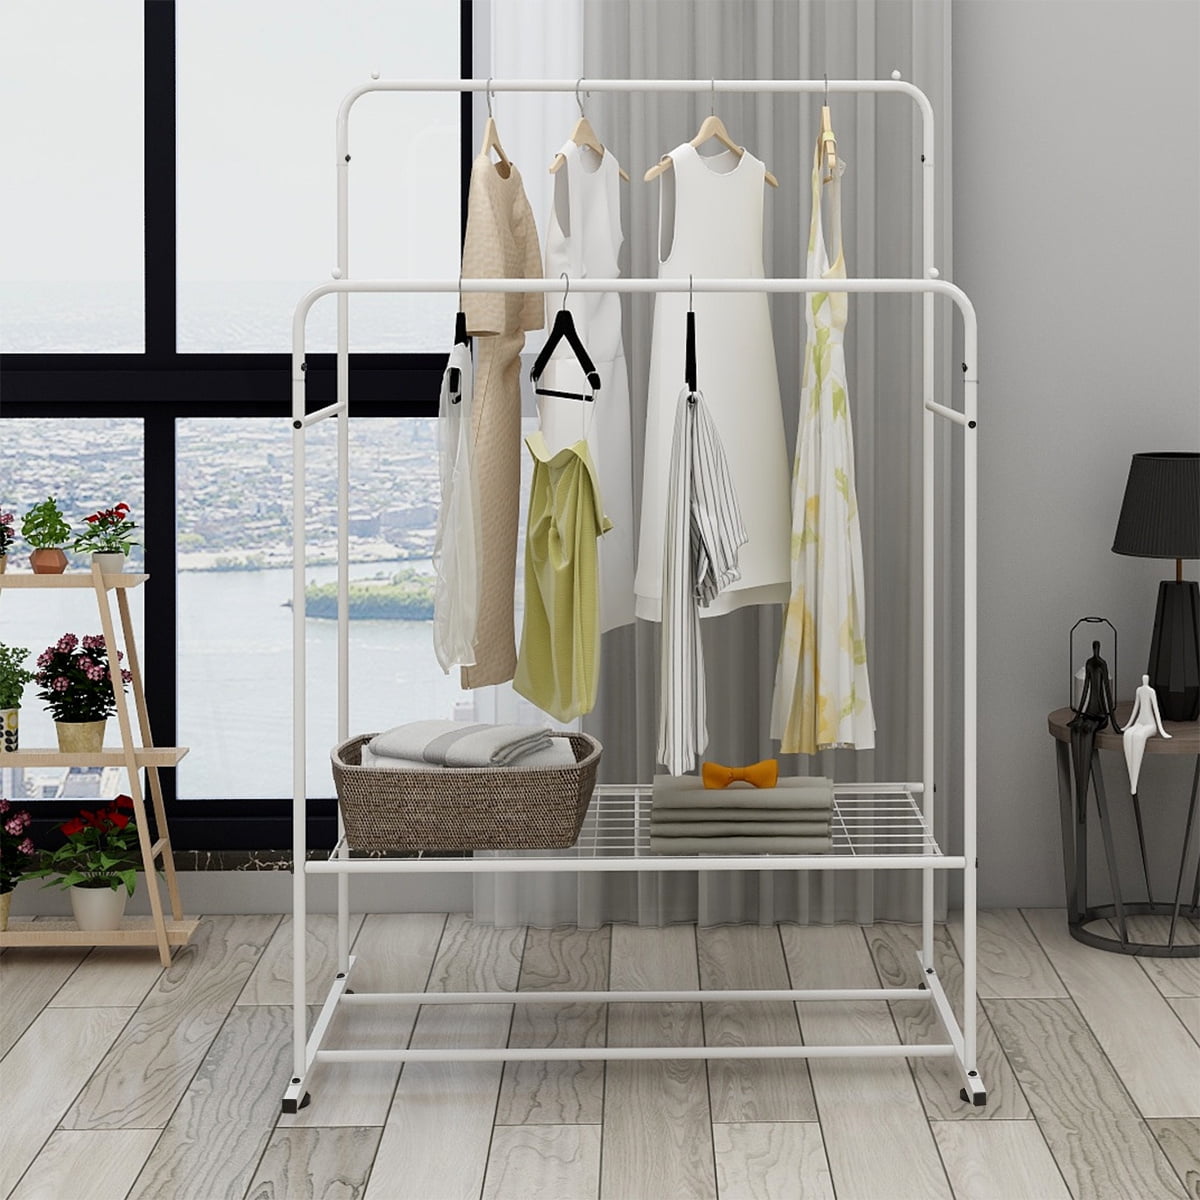 AIEGLE Wall Mounted Clothing Rack, 96 Large Metal Closet Organizer Garment  Rack for Hanging Clothes, Heavy Duty Closet Rack System with Drawers 